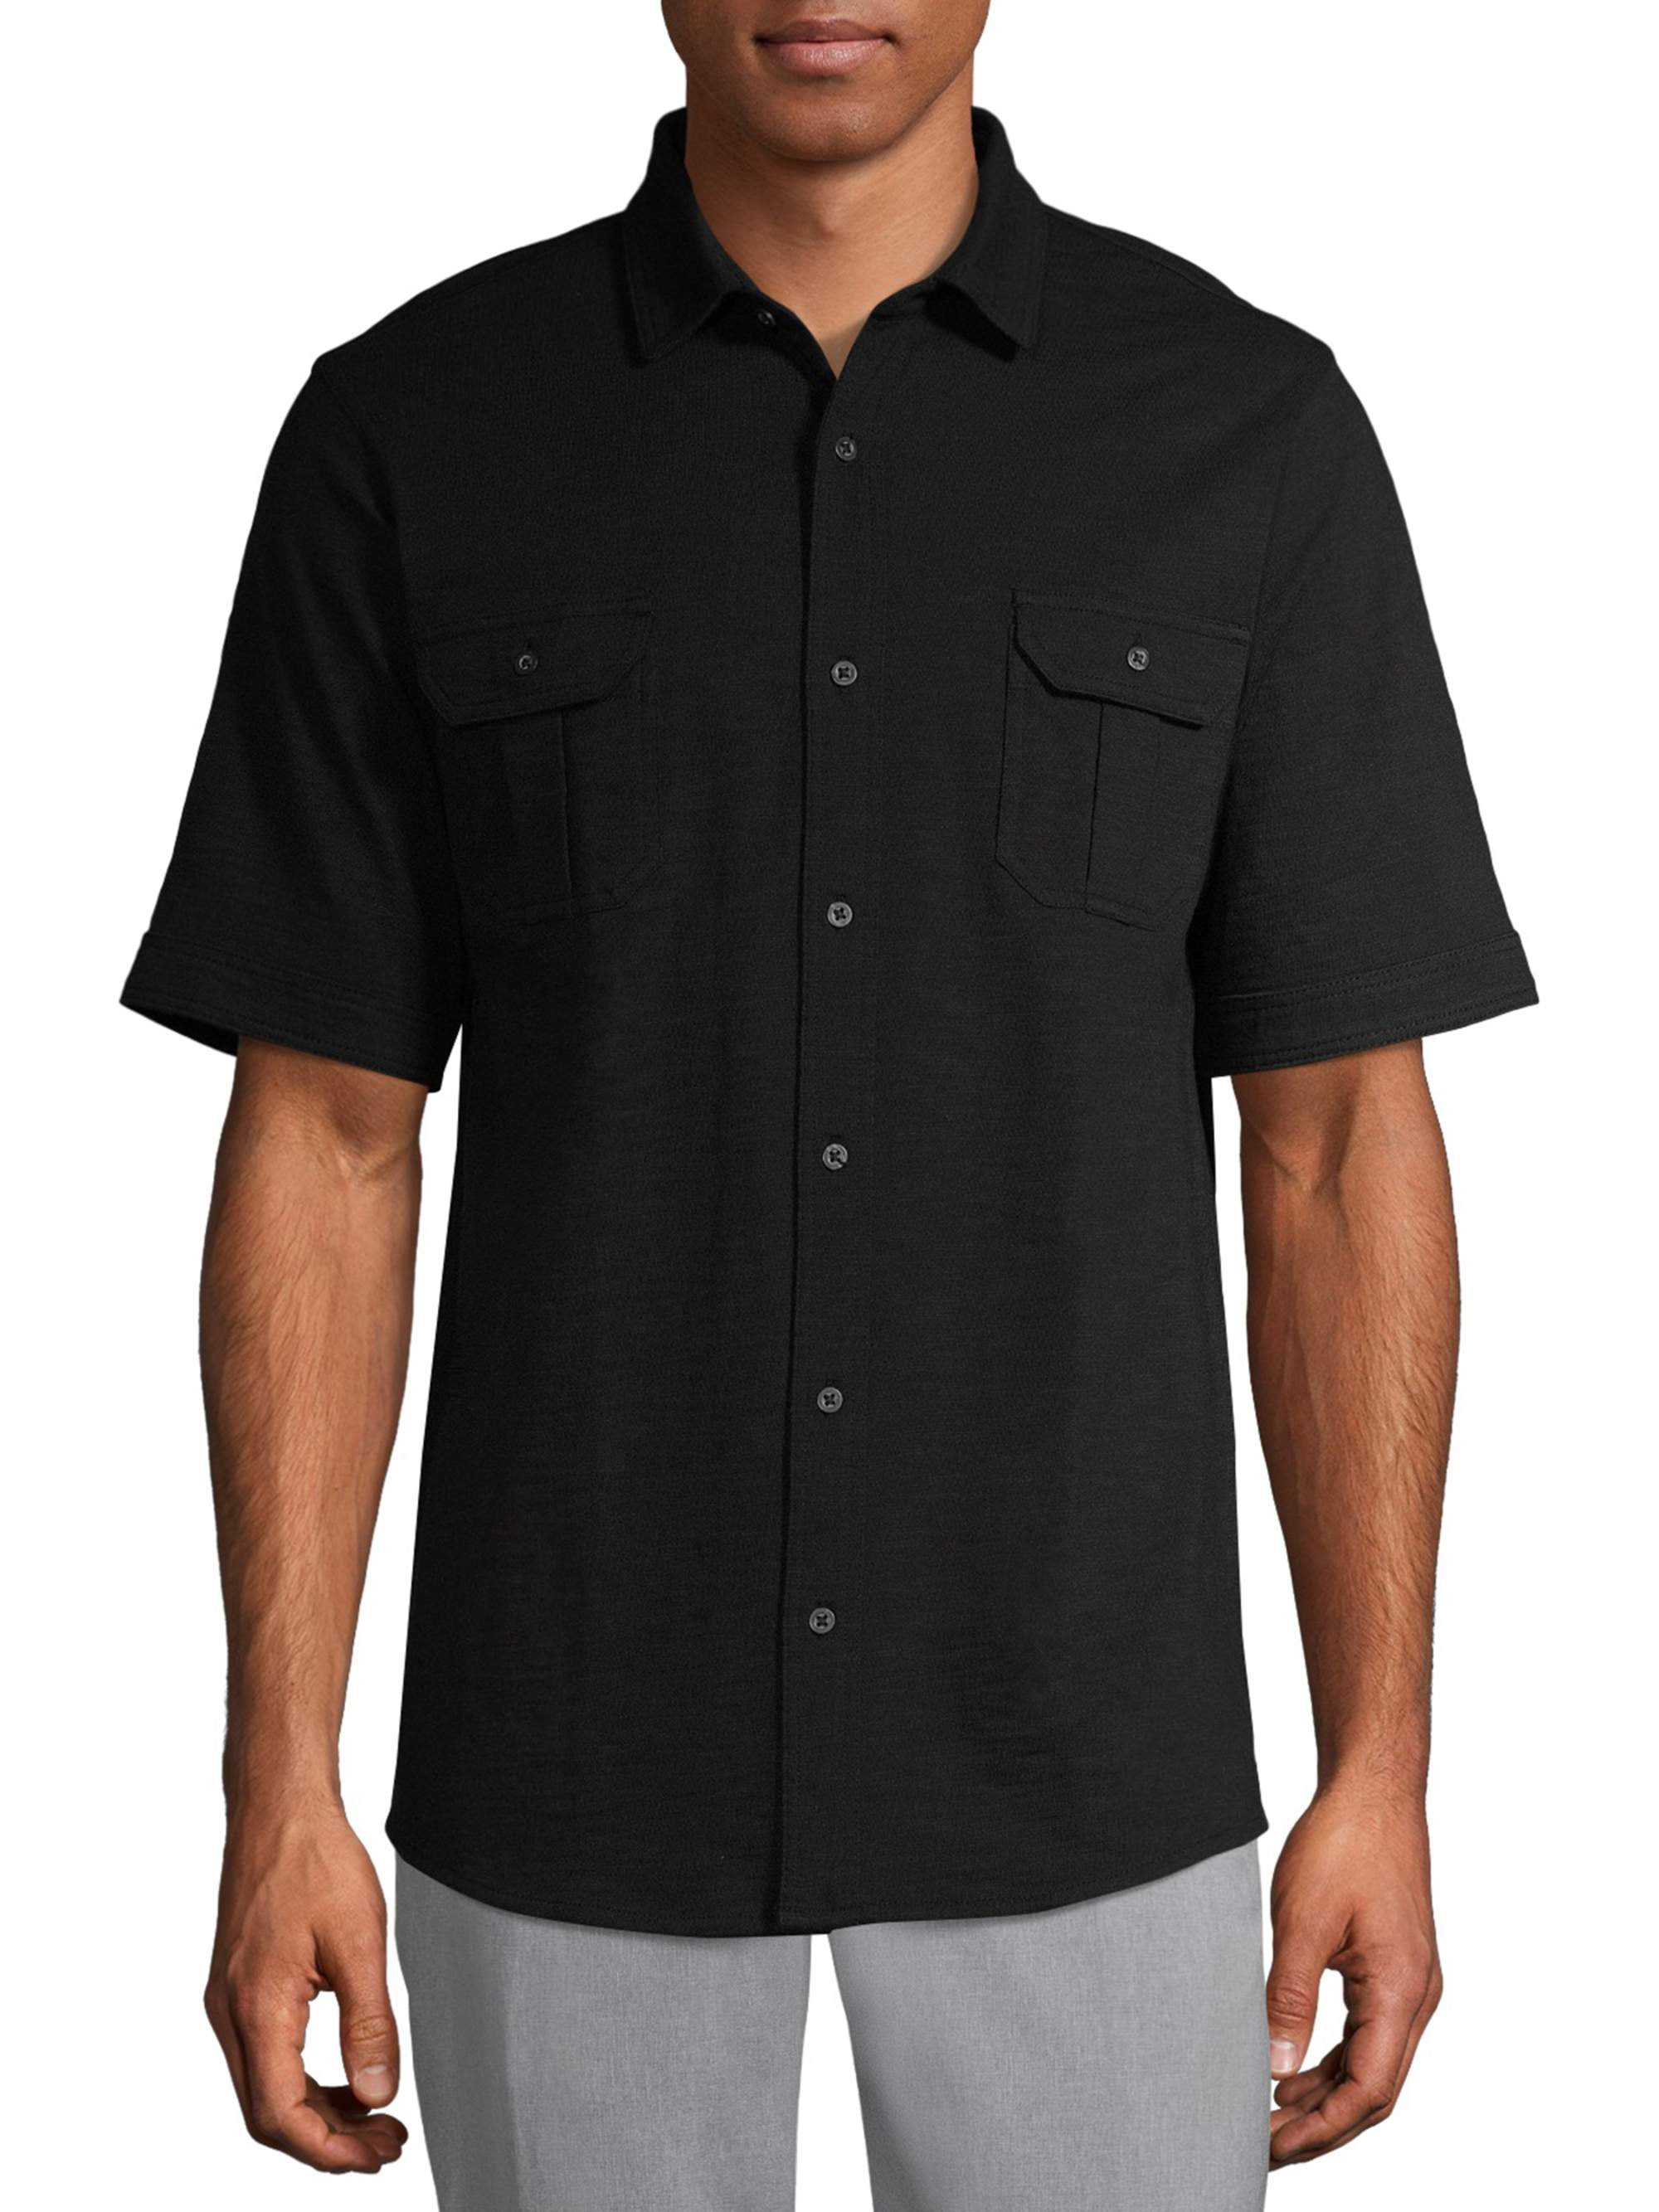 GEORGE - George Men's and Big Men's Ultra Soft Knit Short Sleeve Button